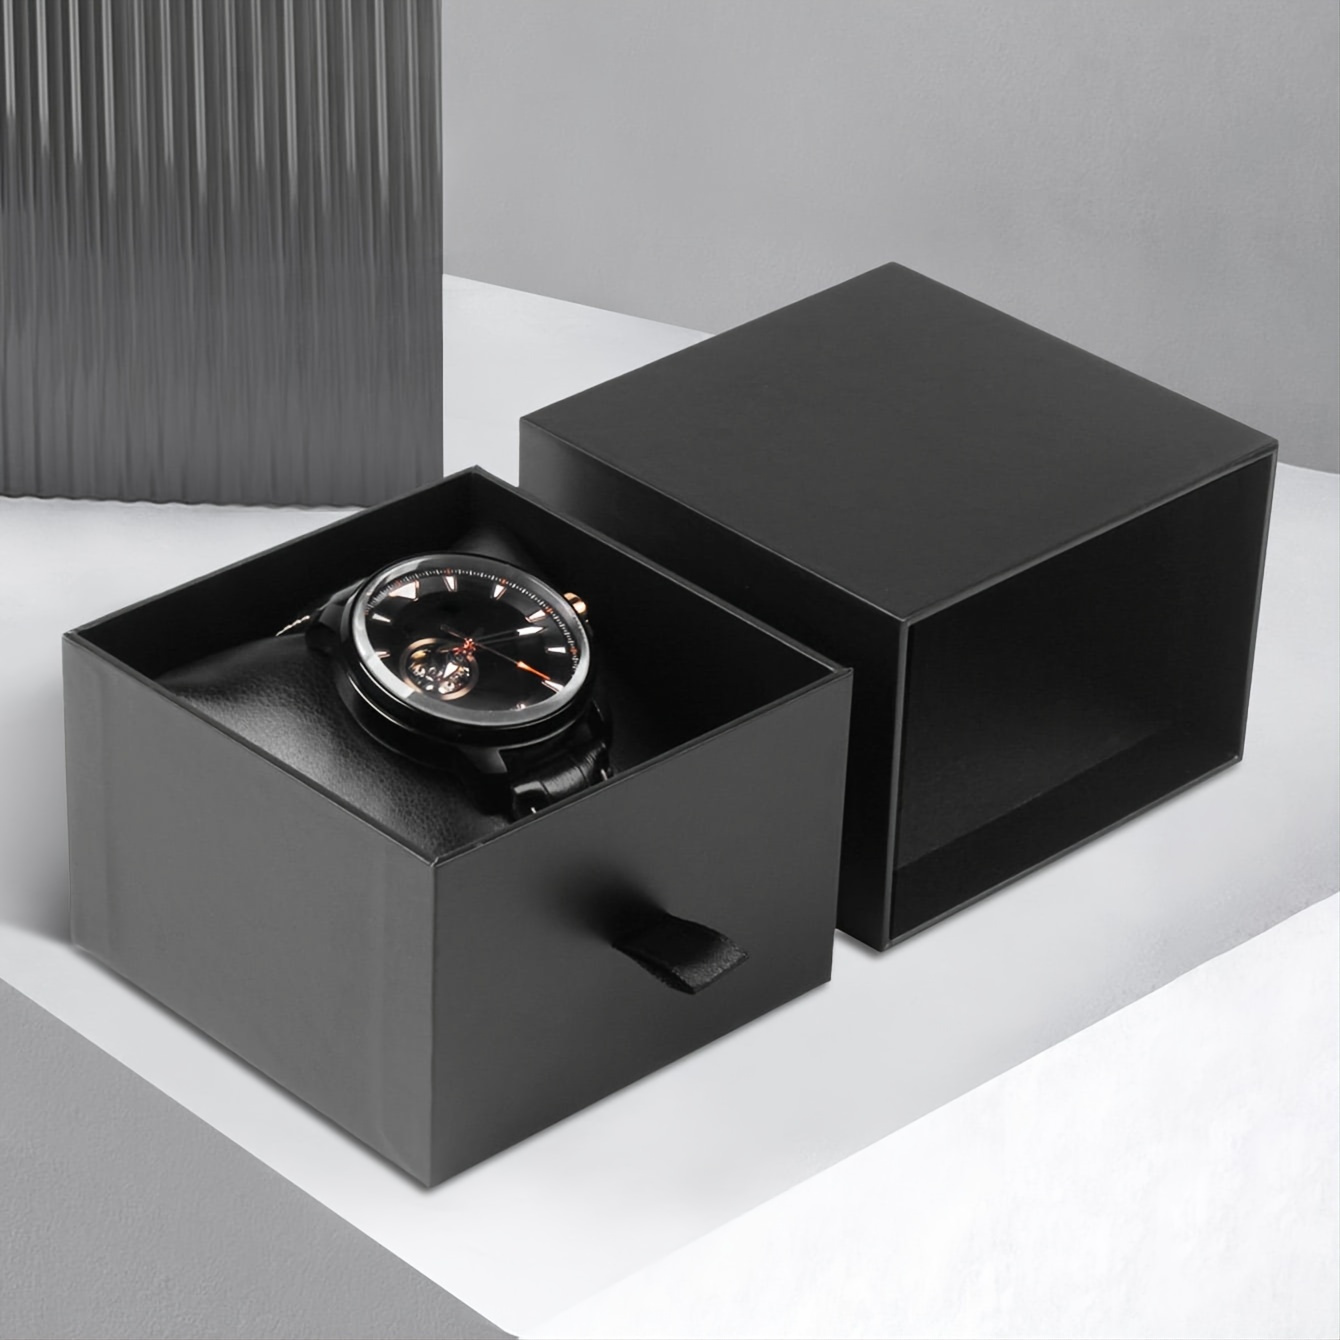 

Removable Black Beautiful Gift Box For Watch